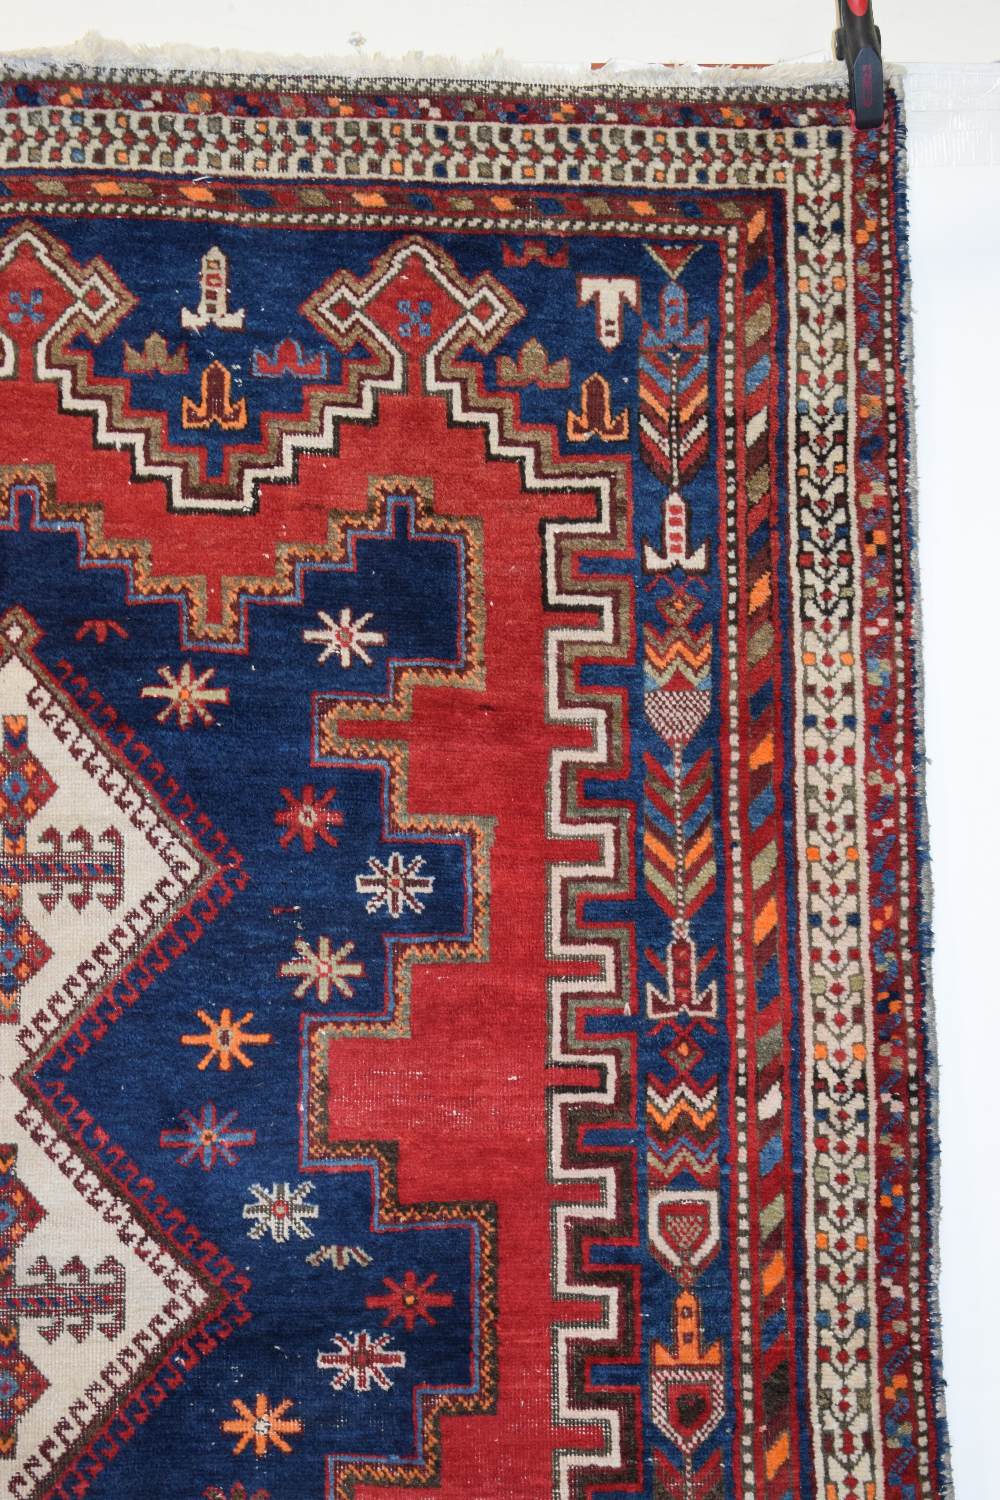 Afshar rug, Kerman area, south east Persia, circa 1930s-40s, 6ft. 8in. X 5ft. 1in. 2.03m. X 1.55m. - Image 3 of 9